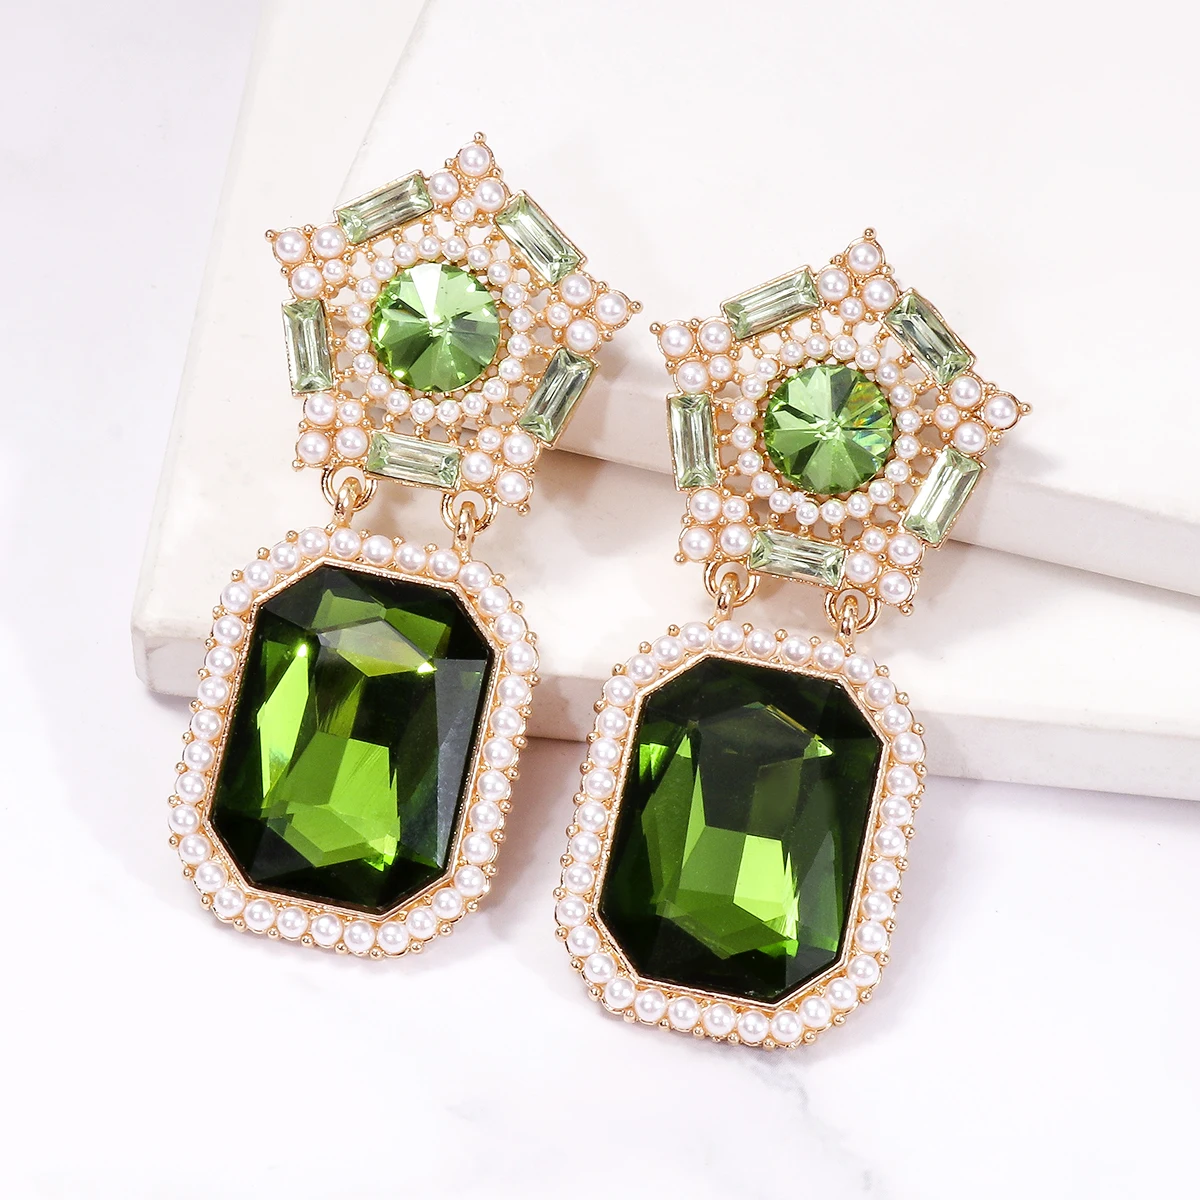 

JURAN Vintage Green Crystal Square Geometric Drop Earrings Inlaid Pearls Earrings Statement Jewelry Accessories for Women Gifts